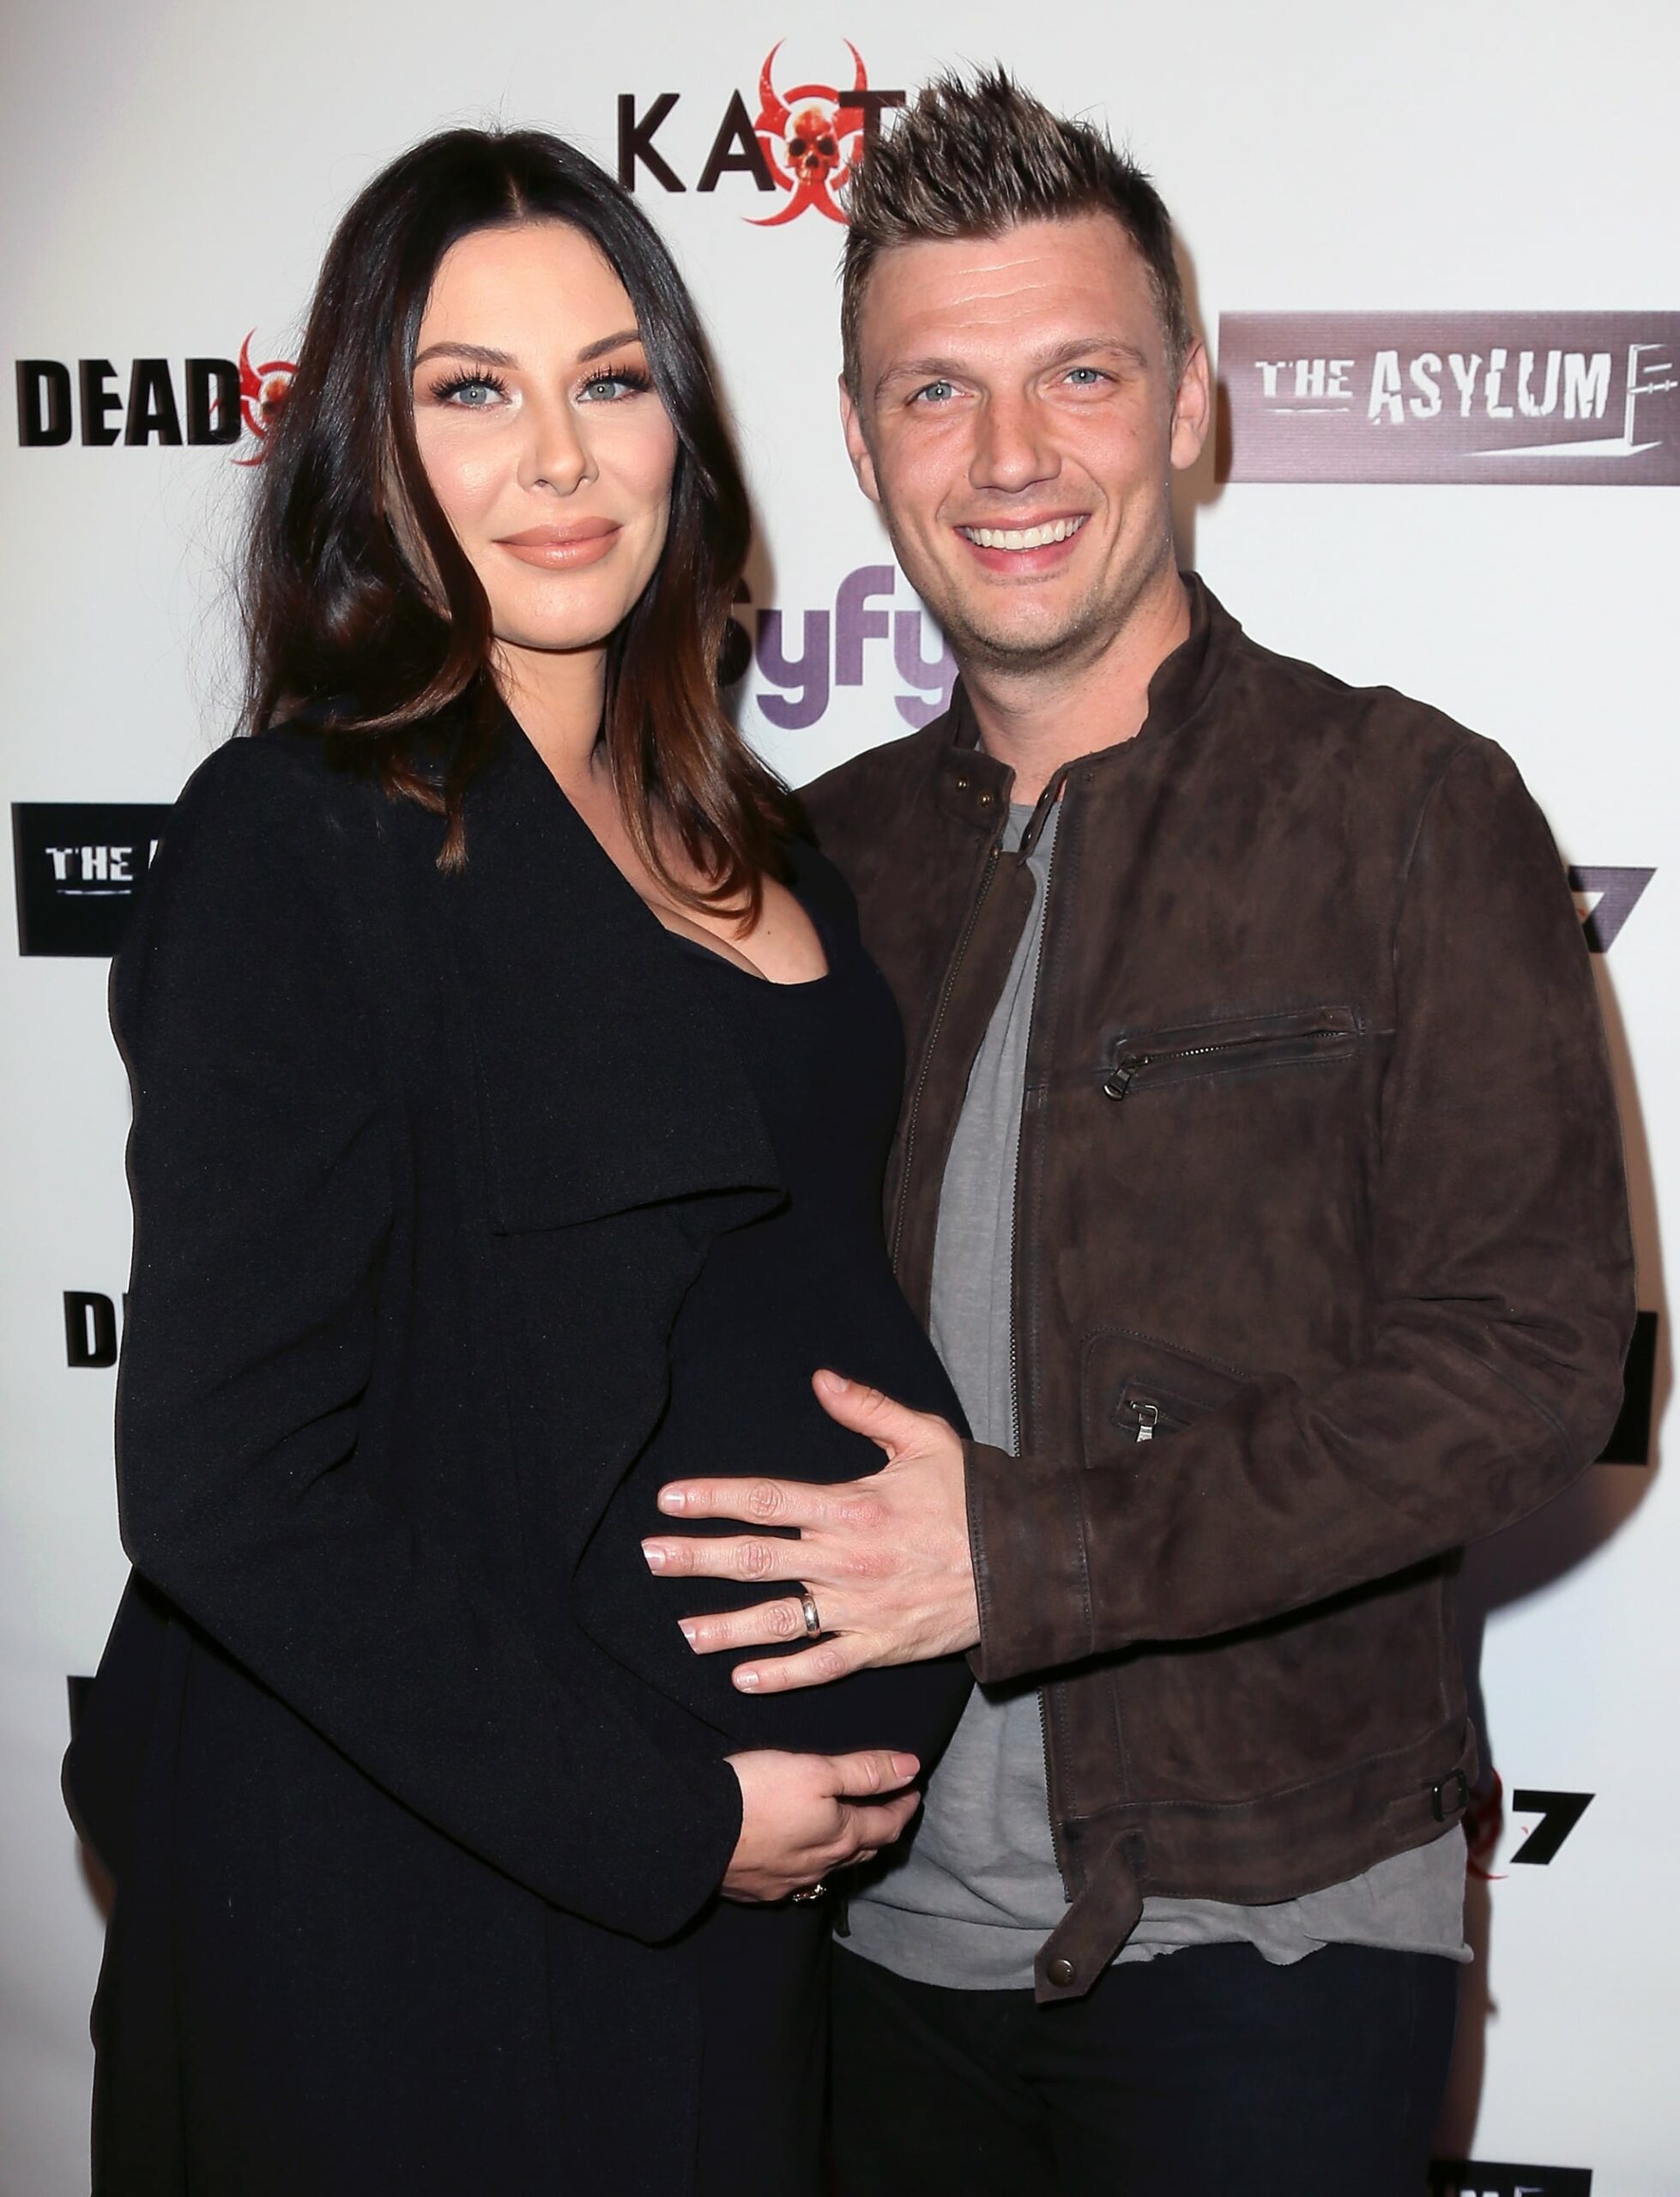 LOS ANGELES, CALIFORNIA - APRIL 01:  Singer Nick Carter (R) and wife Lauren Kitt attend the premiere of Syfy